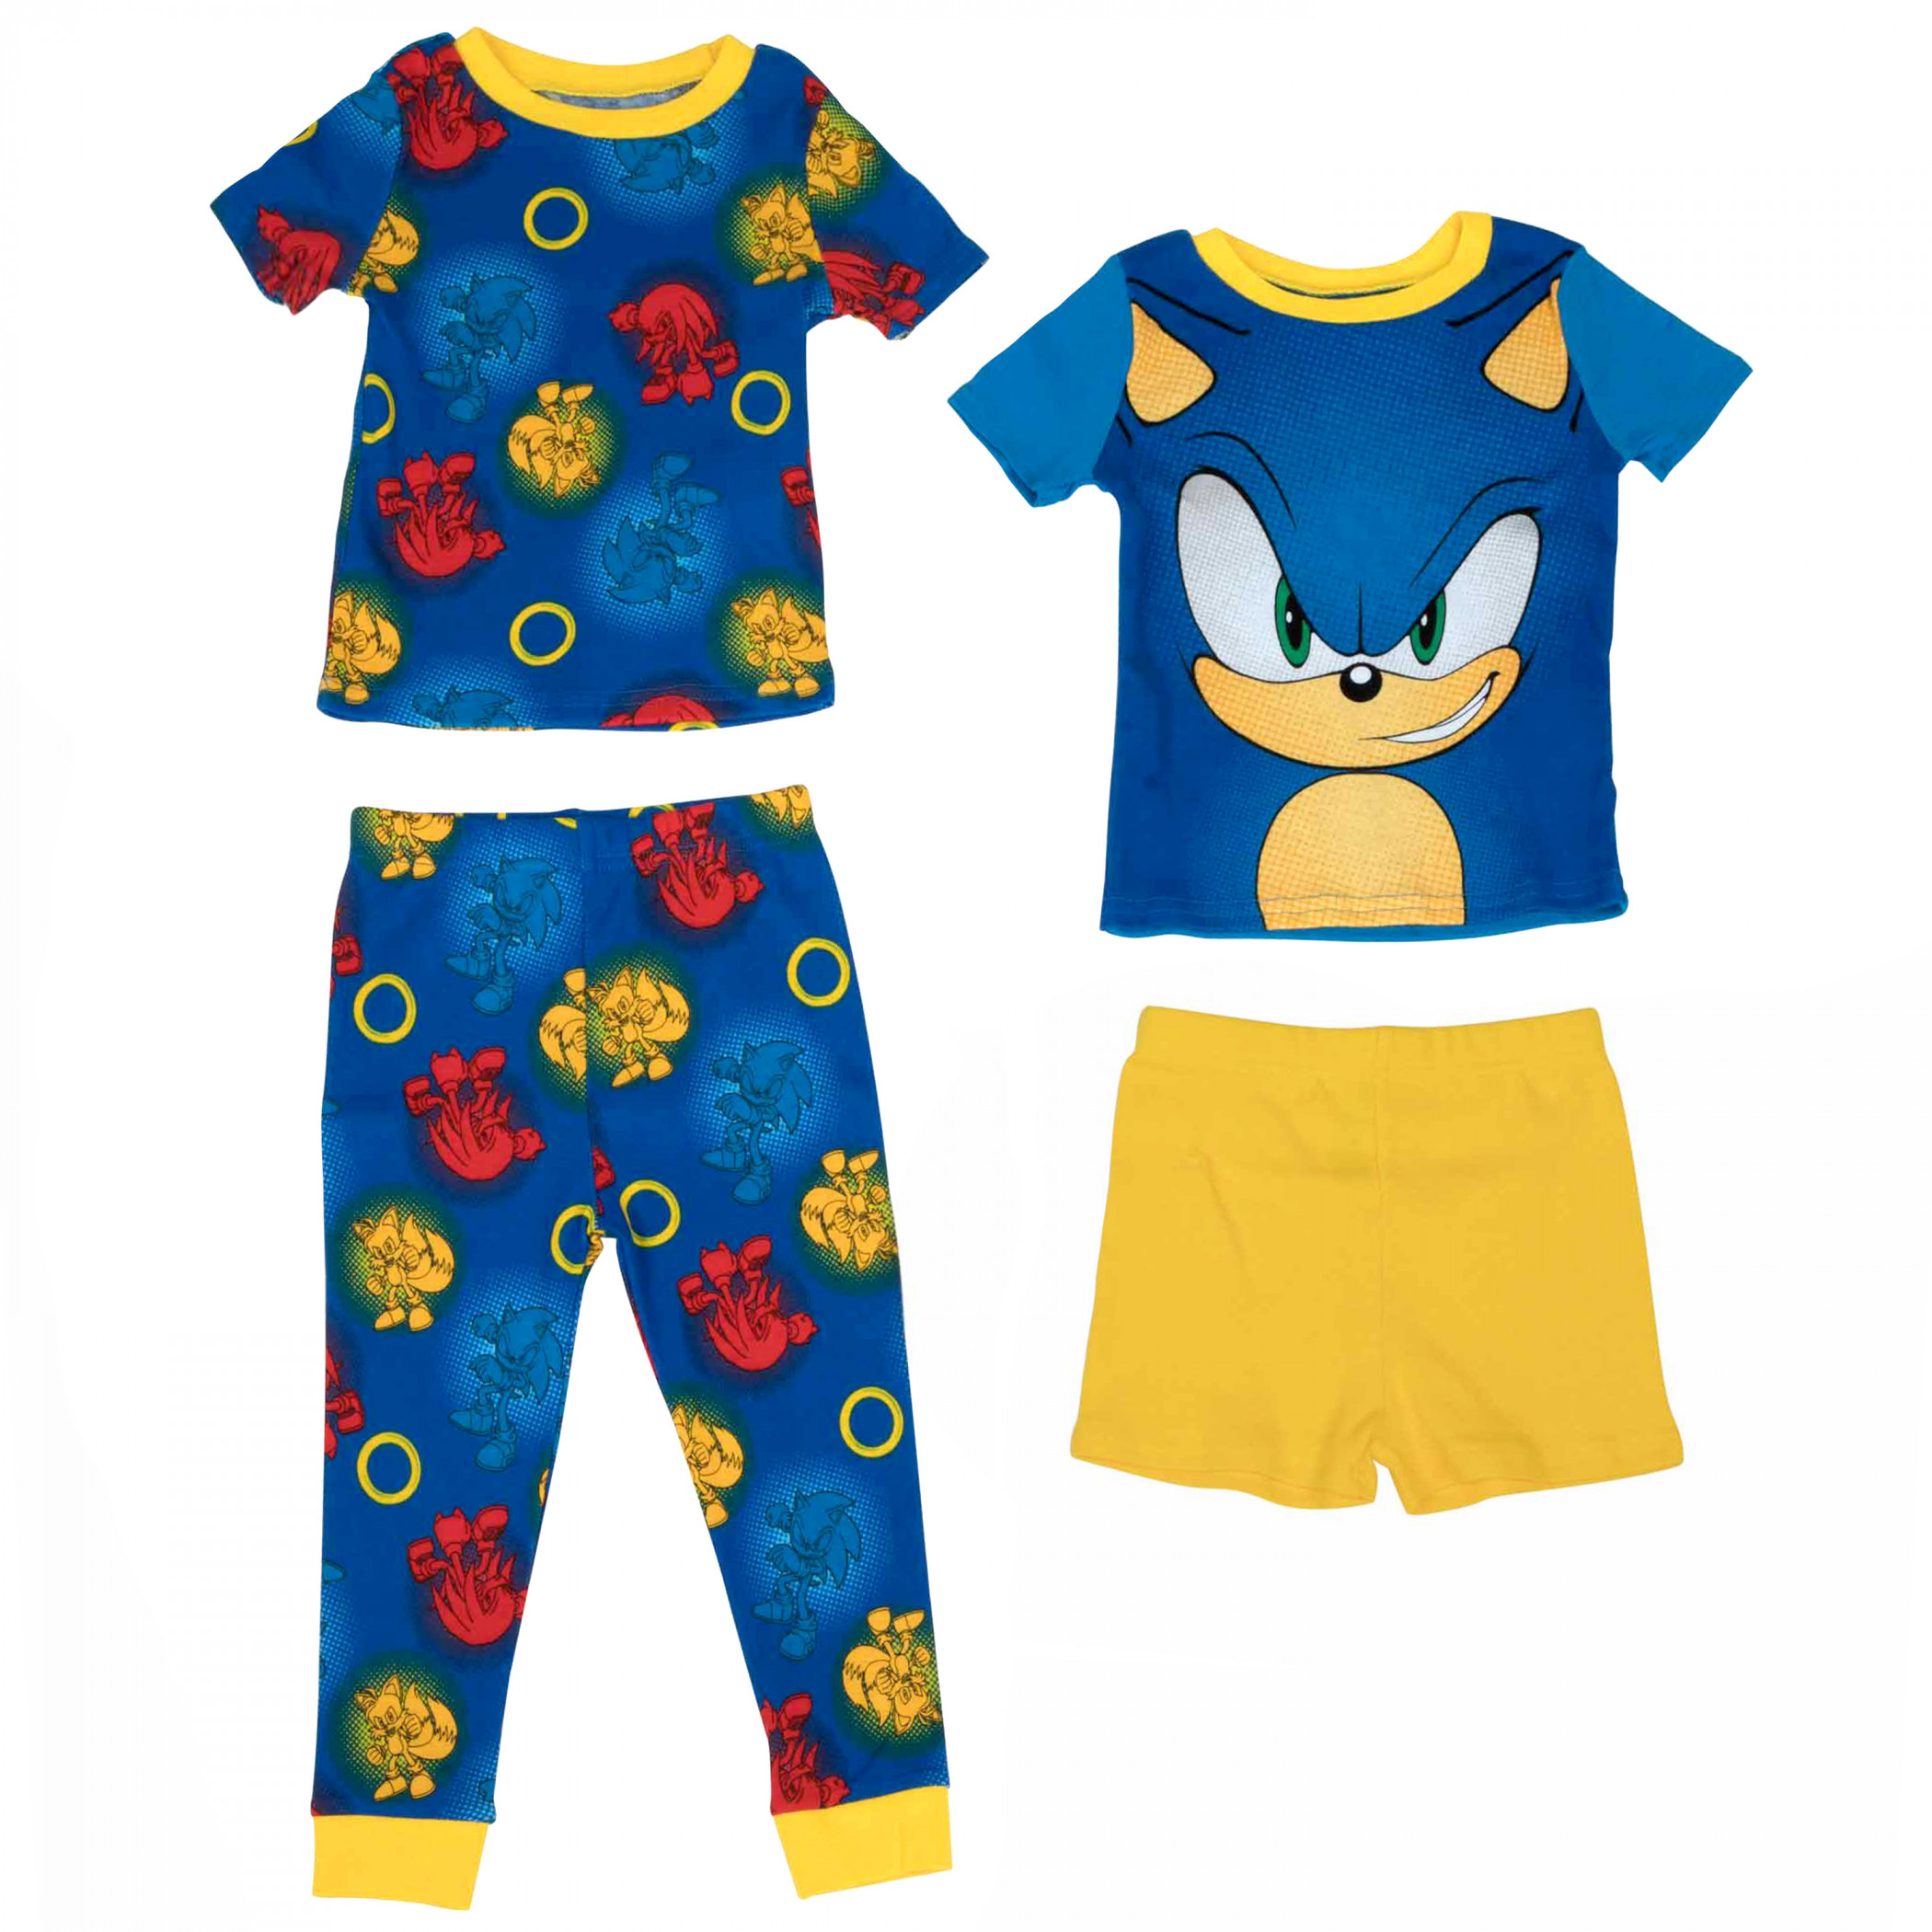 Sonic The Hedgehog with Tails and Knuckles 4-Piece Toddler Pajama Set